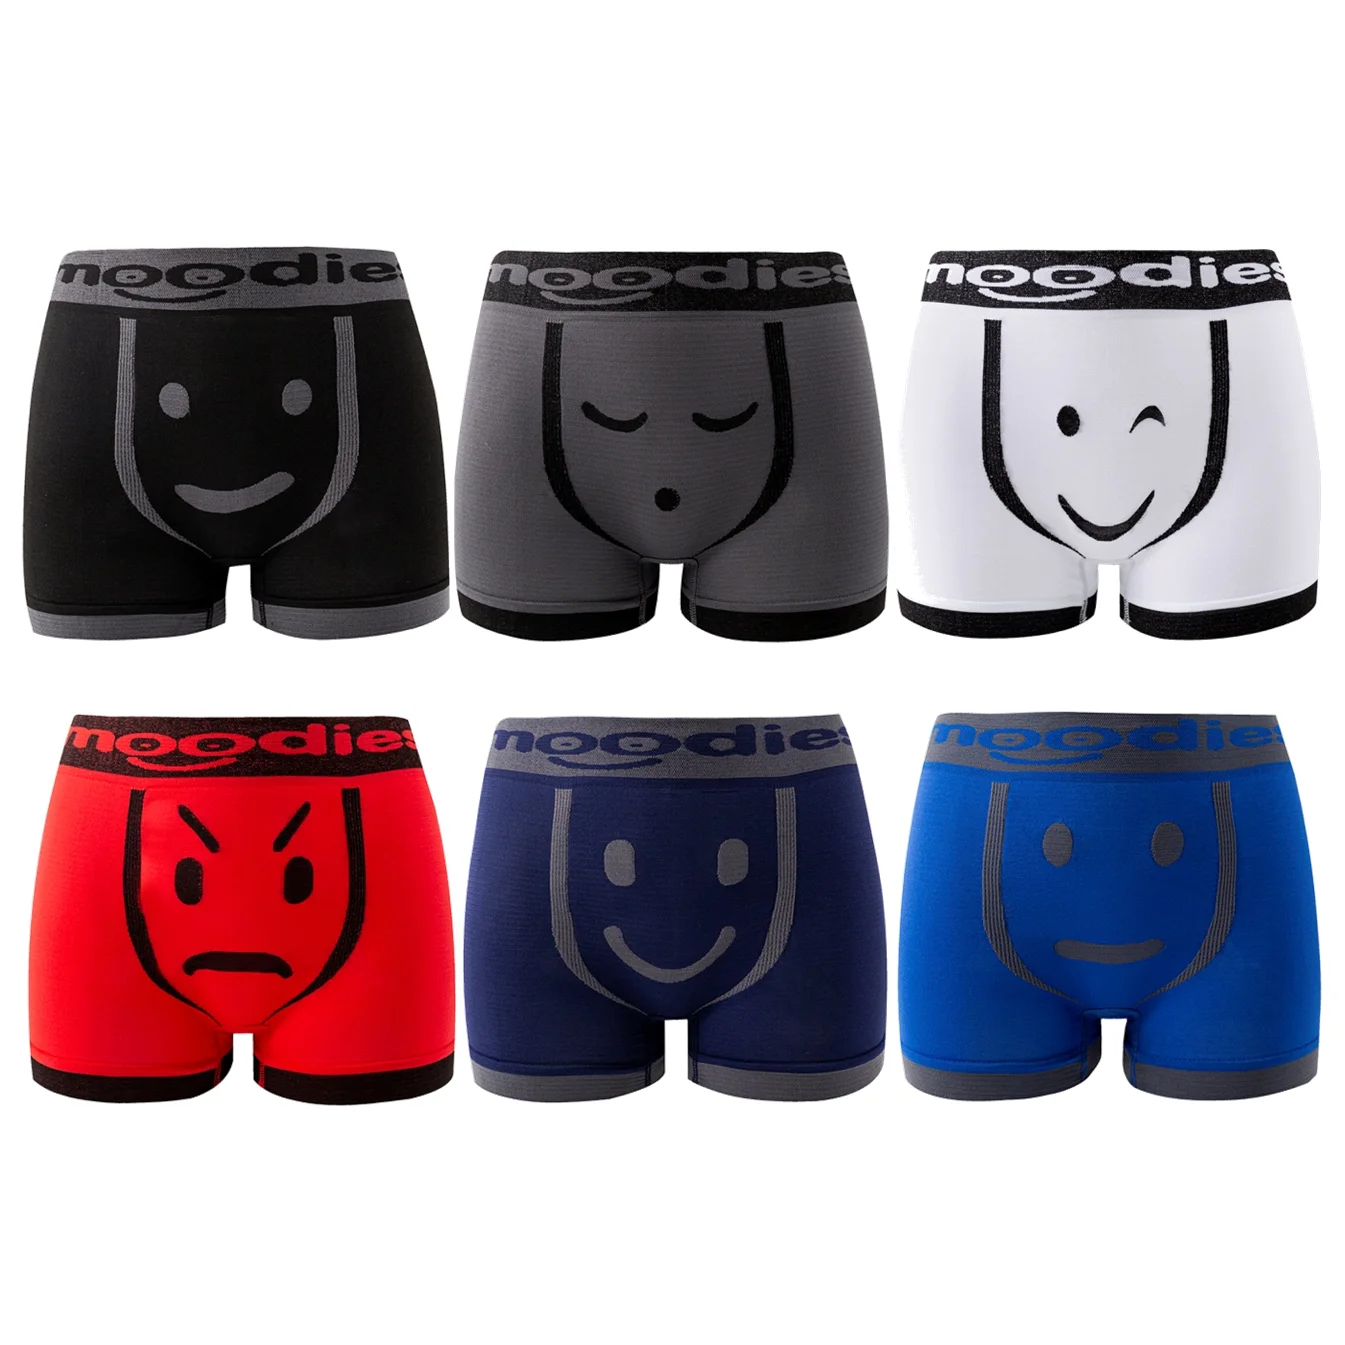 full color 6-pack] RTS005 emo moodies